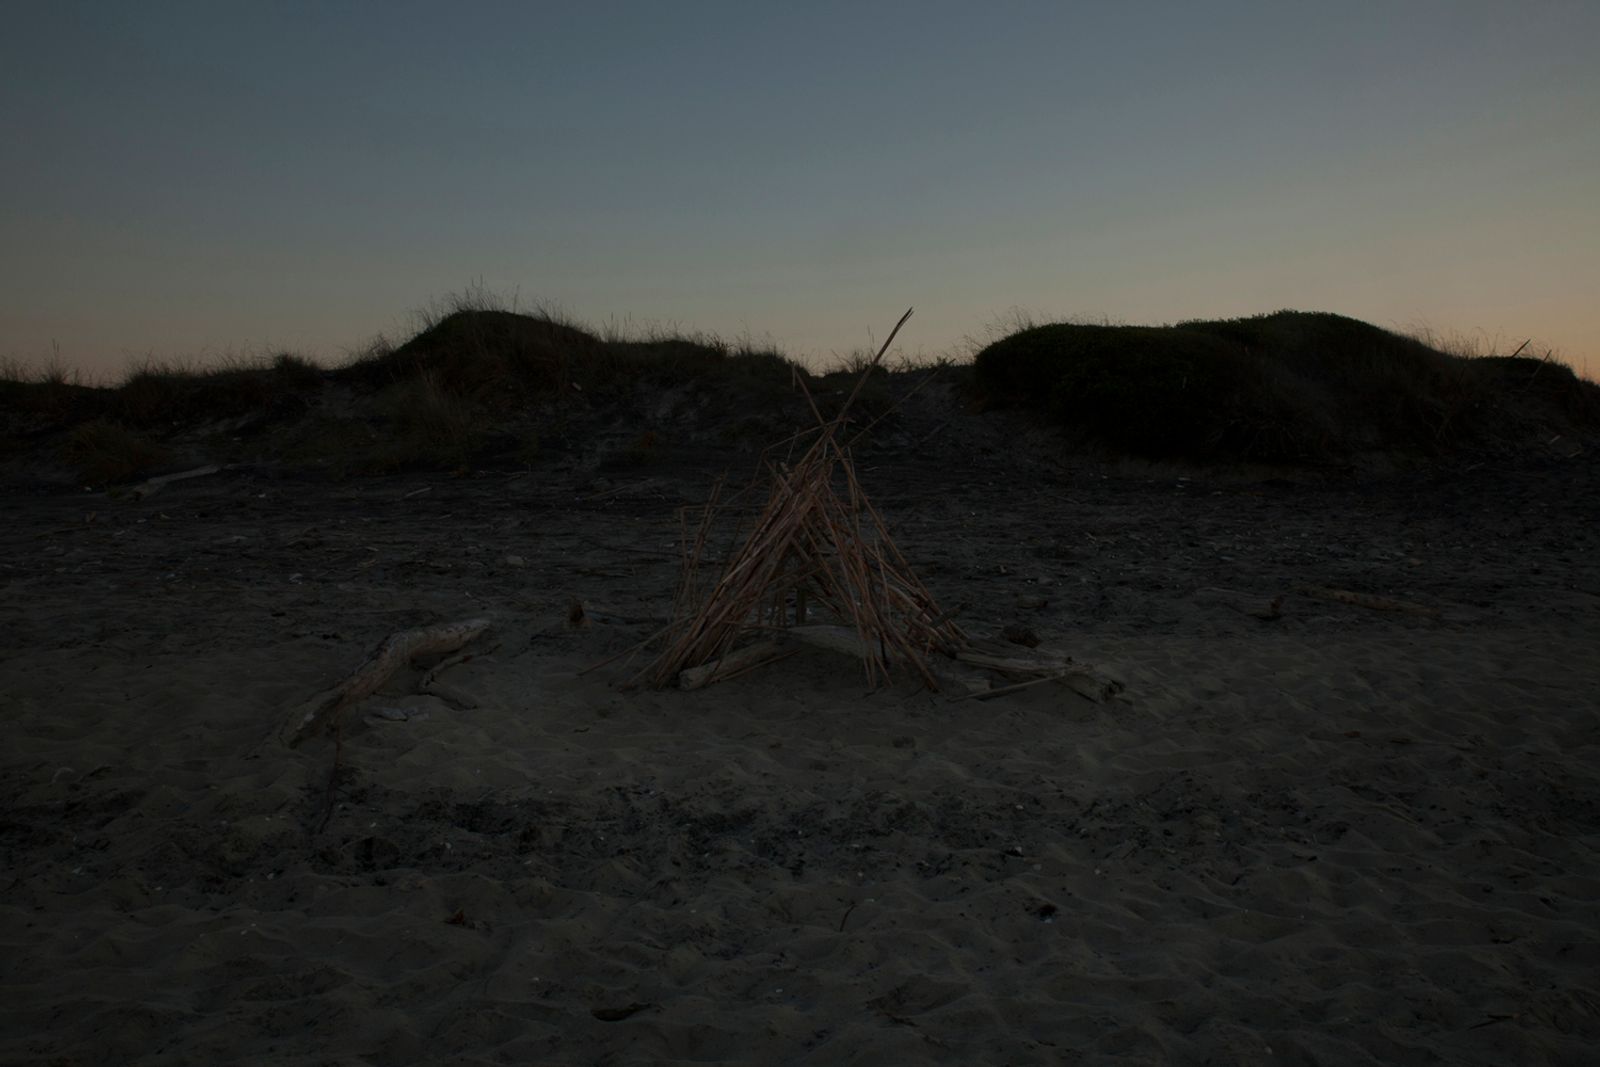 © Alessia Rollo - Image from the Fata Morgana photography project